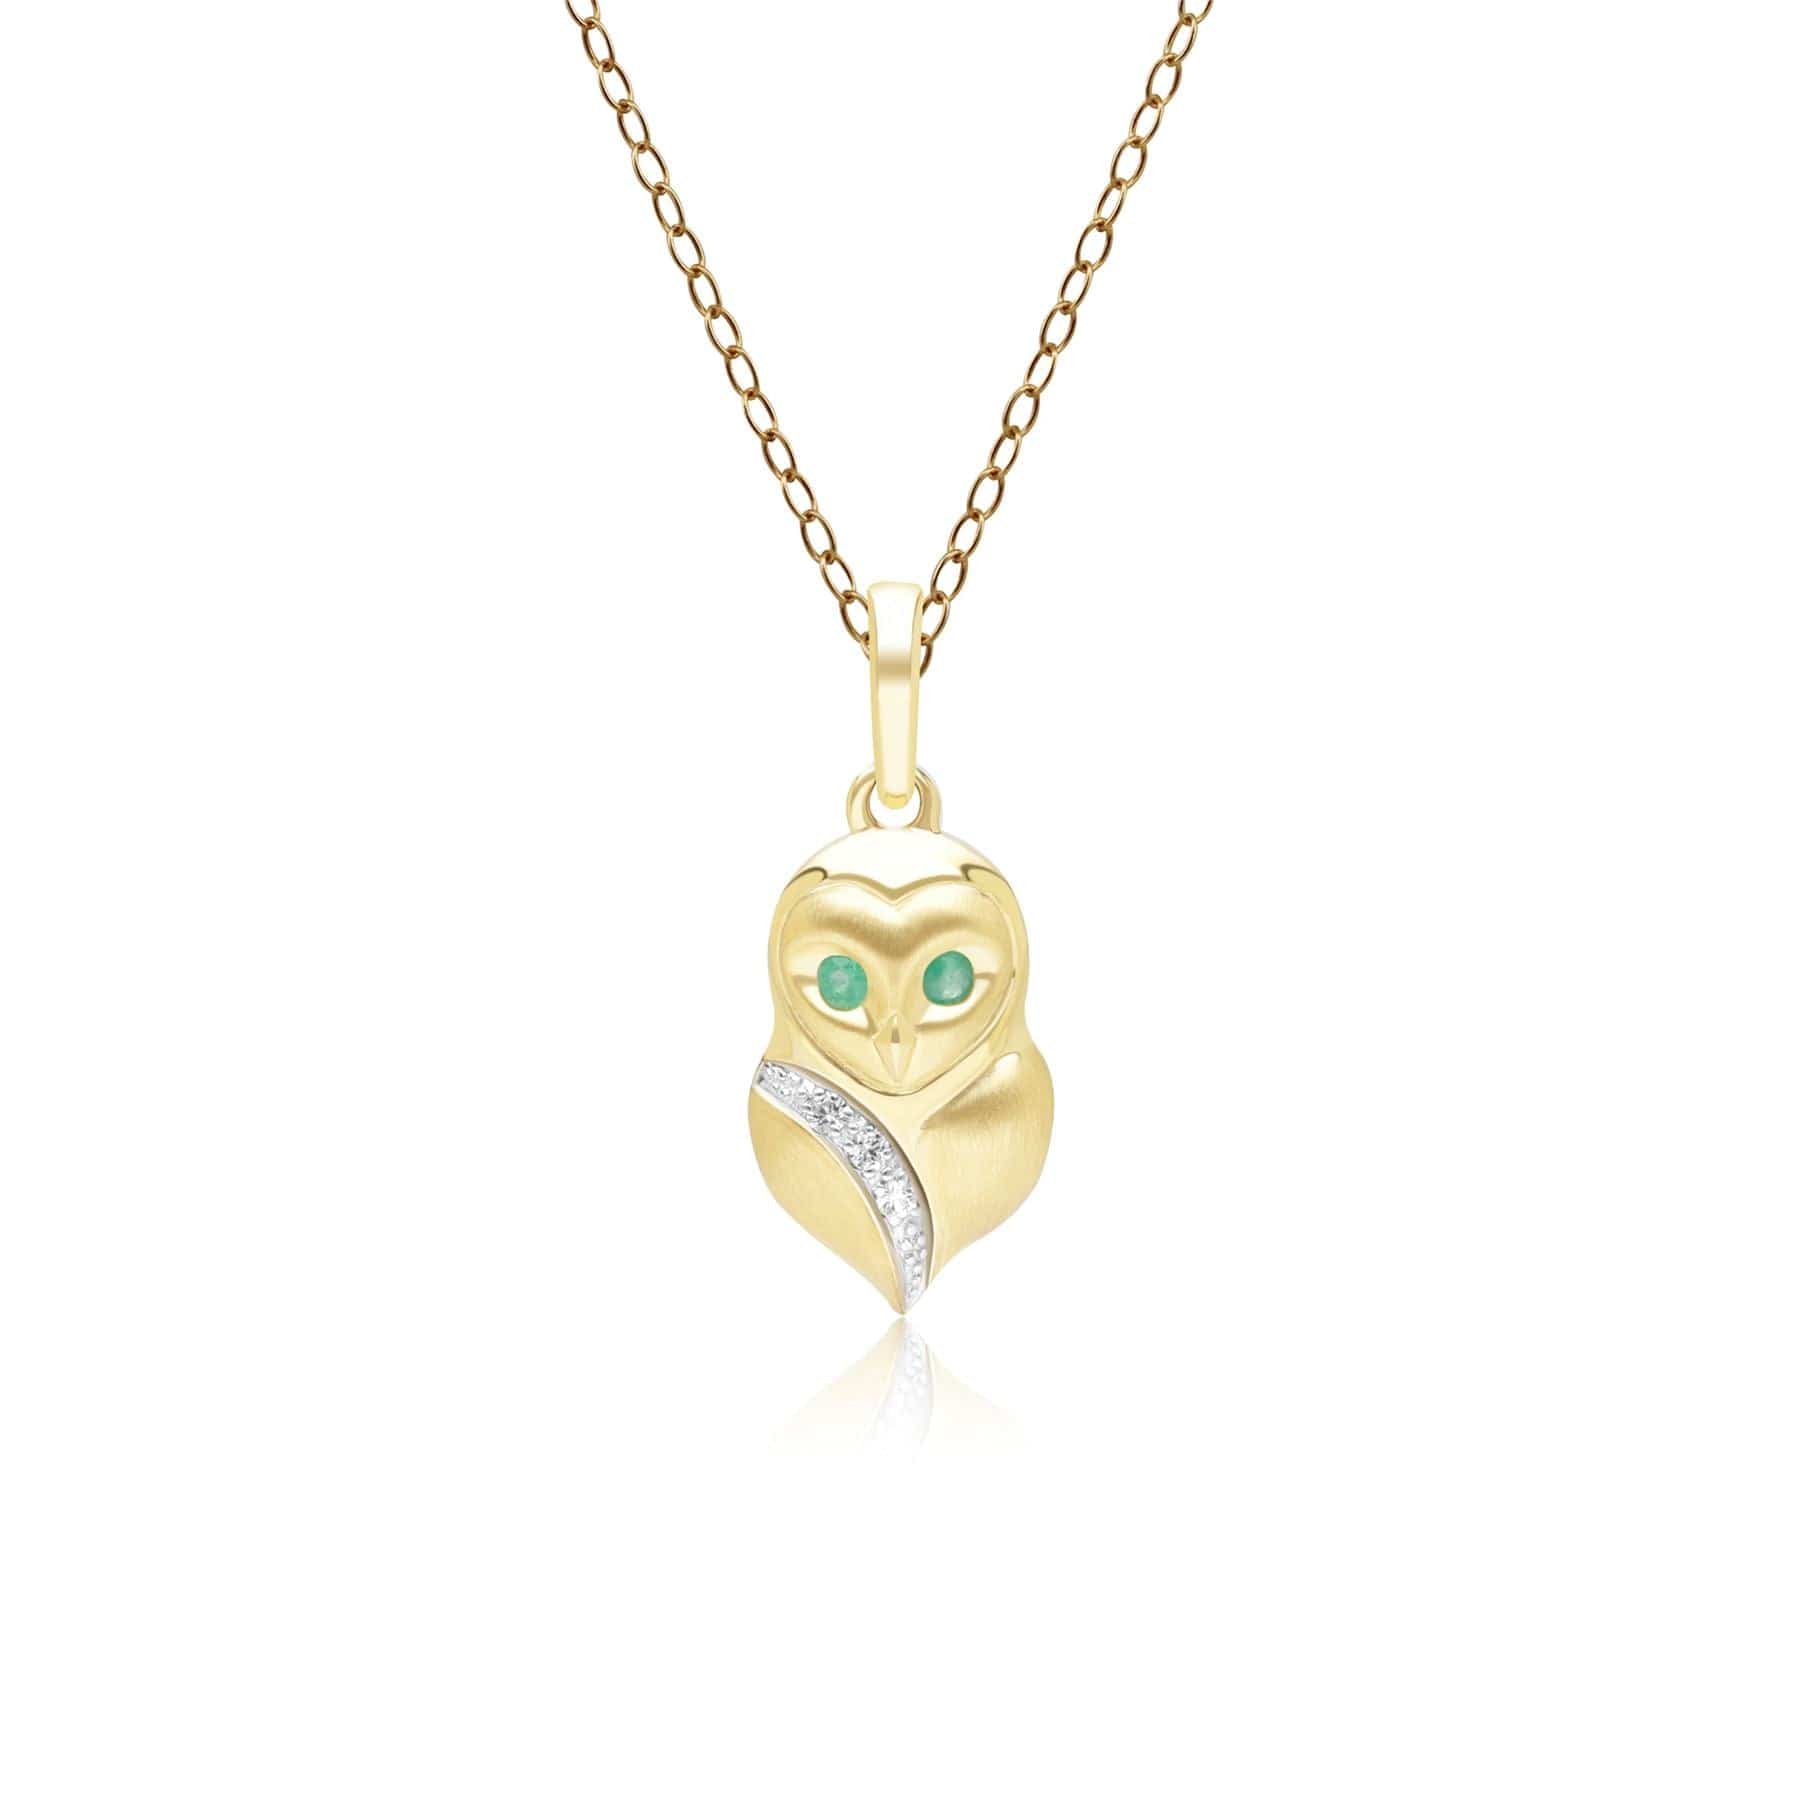 135P2128029 Gardenia Emerald and White Sapphire Owl Pendant Necklace in 9ct Yellow Gold Front